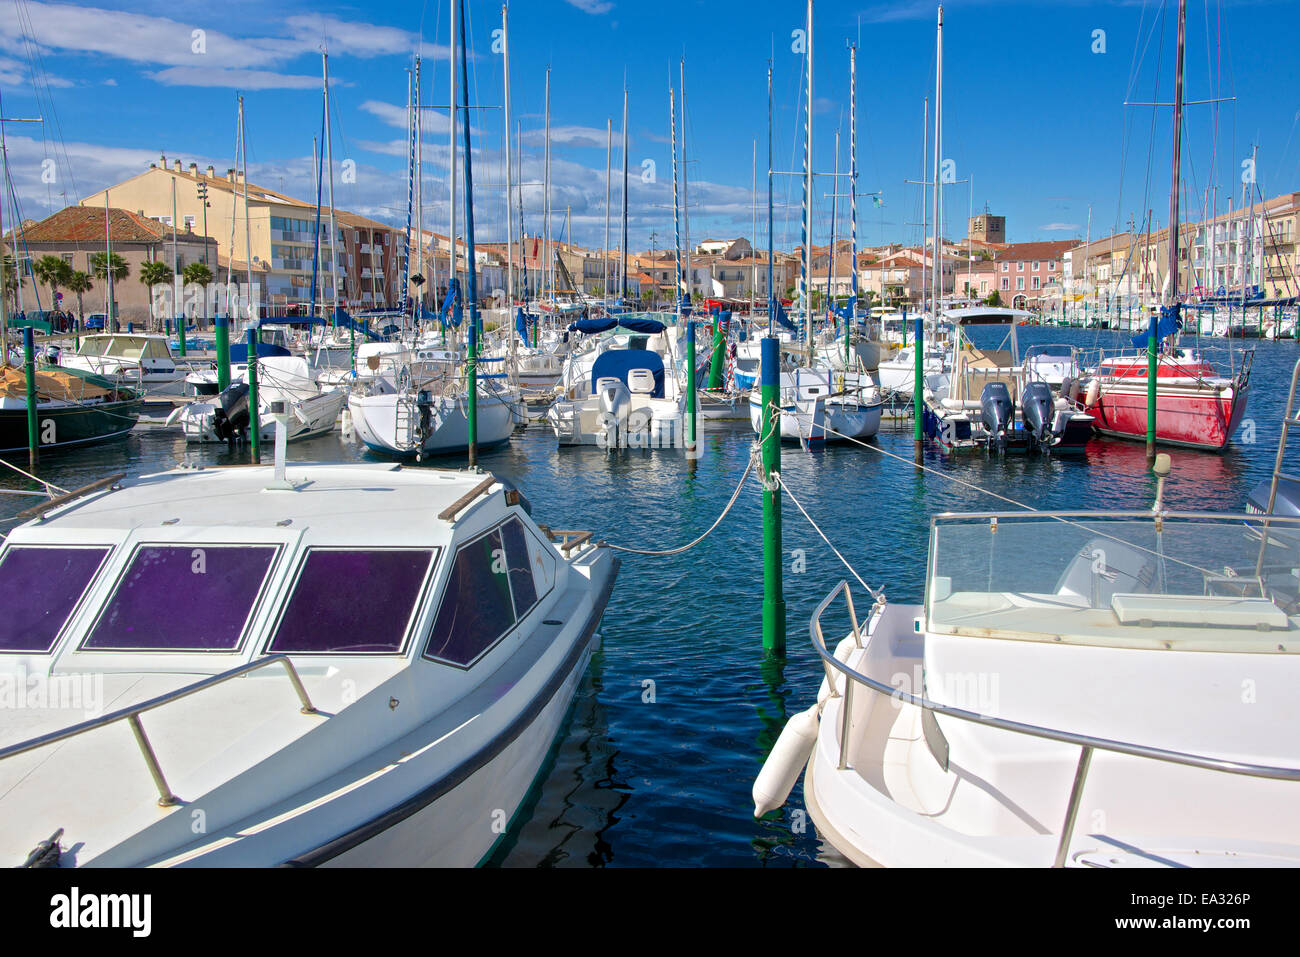 Boats in marina, Meze, Herault, Languedoc Roussillon region, France, Europe Stock Photo